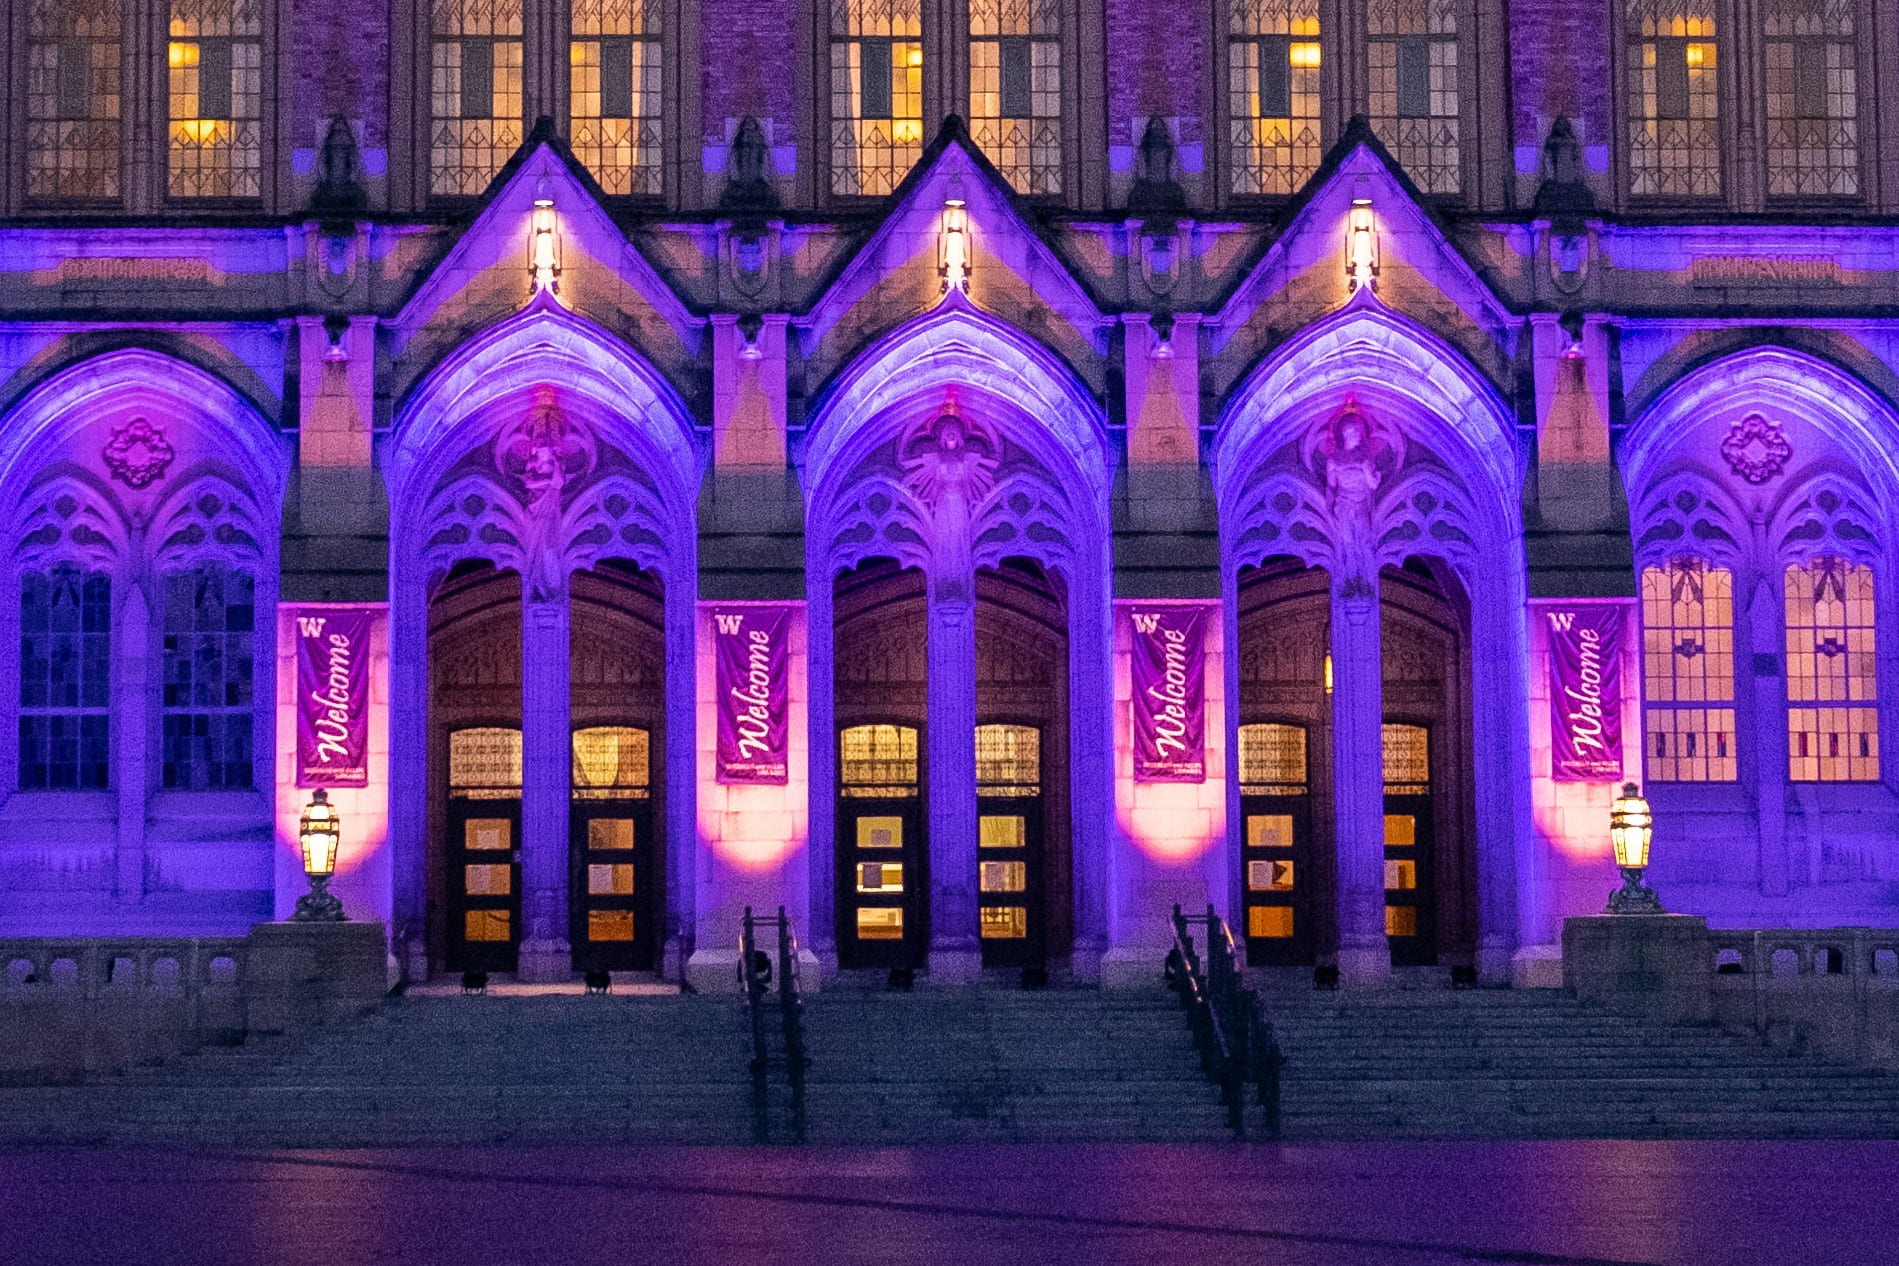 Suzzallo Library's west entrance lit up in UW purple at night.